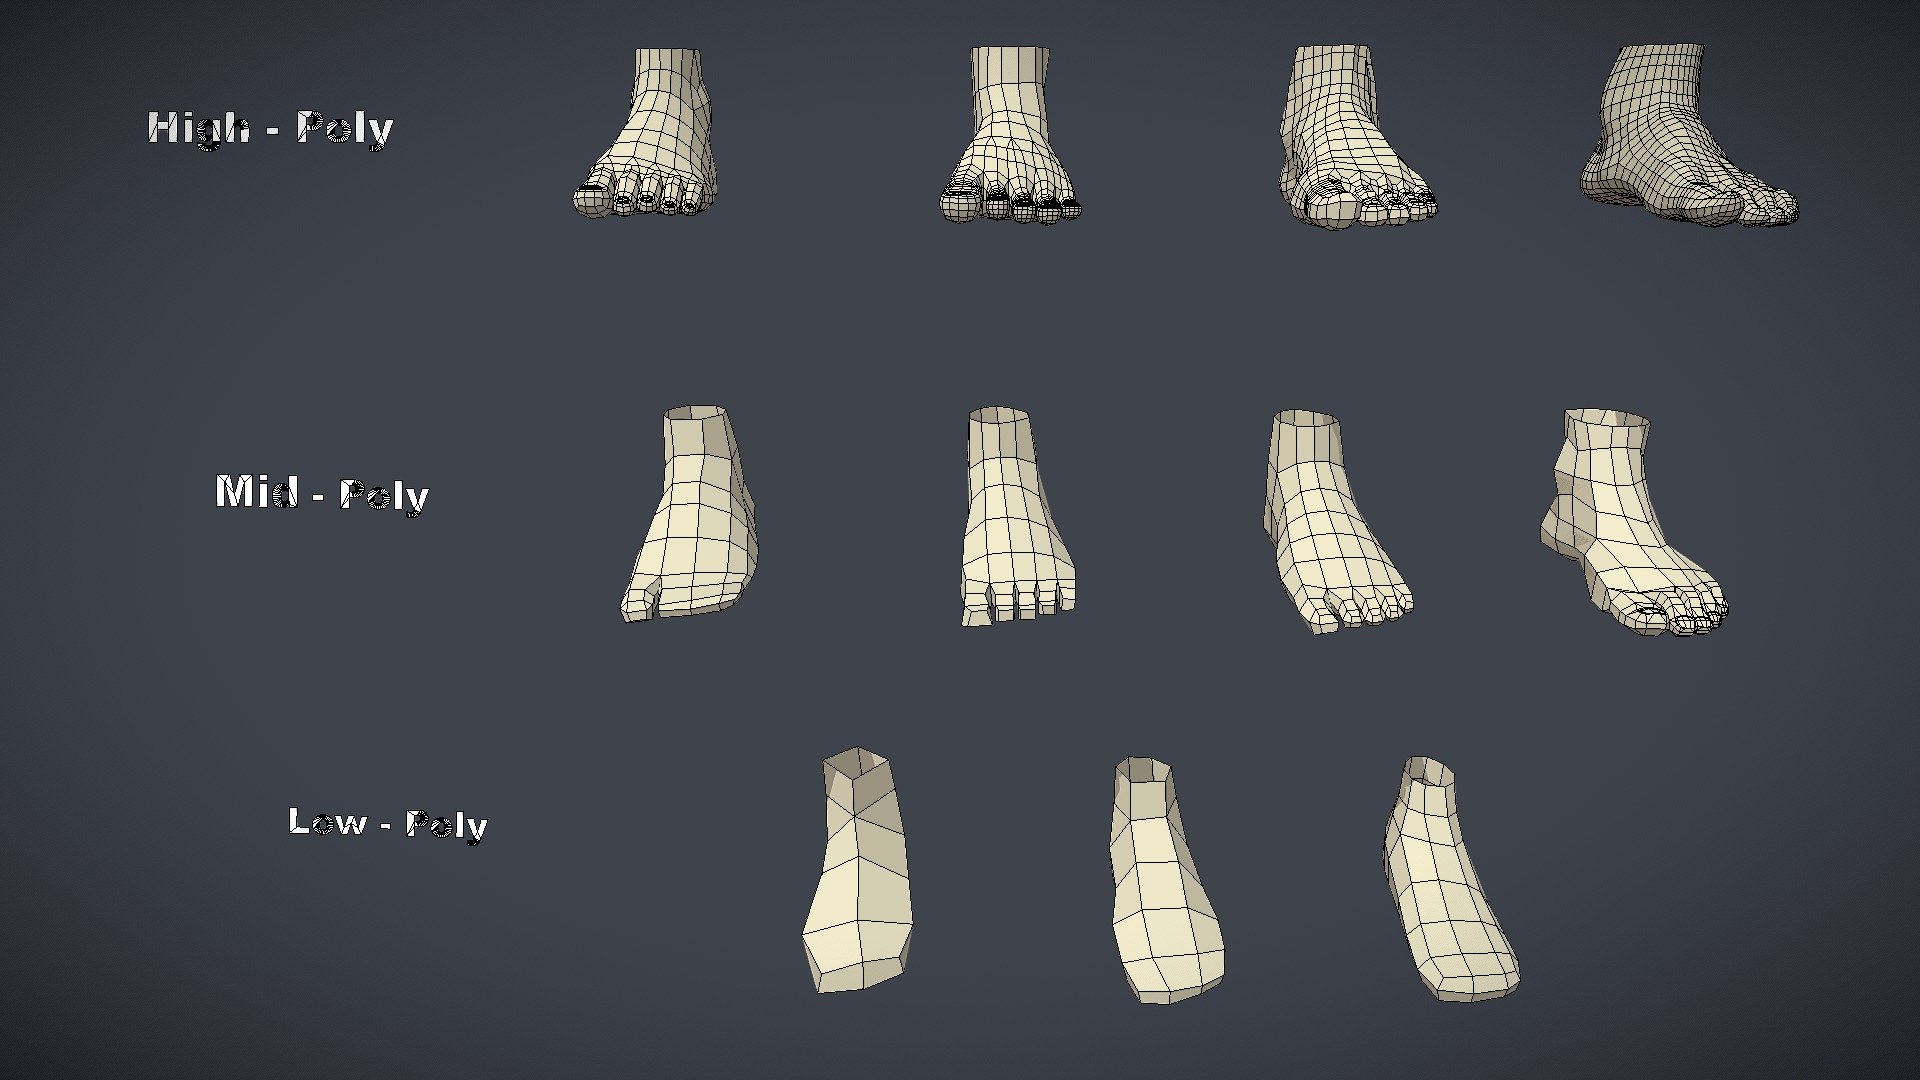 Hi everybody. Introducing to everyone 12 optimized legs mesh sets from lowest to highest version. Convenient for rendering and artistic creation.



Package description:





Collection includes 11 legs model files ( FBX ) 

Mesh amounts range from 52 tris to 2864 tris

The mesh part connects the wrist from 4, 8, 10, 12, 14, 22, 36.



Model reference hands: https://sketchfab.com/3d-models/hands-pack-14b5ec4abeed4de3a67243b2ba737819

Model reference head: https://sketchfab.com/3d-models/mesh-head-a3186afdef4b41038adf4278aa6307d3



Contact me for support. Hope to receive feedback from everyone. Thank - Legs Pack - Buy Royalty Free 3D model by DuNguyn - Assets store (@nguyenvuduc2000) 3d model